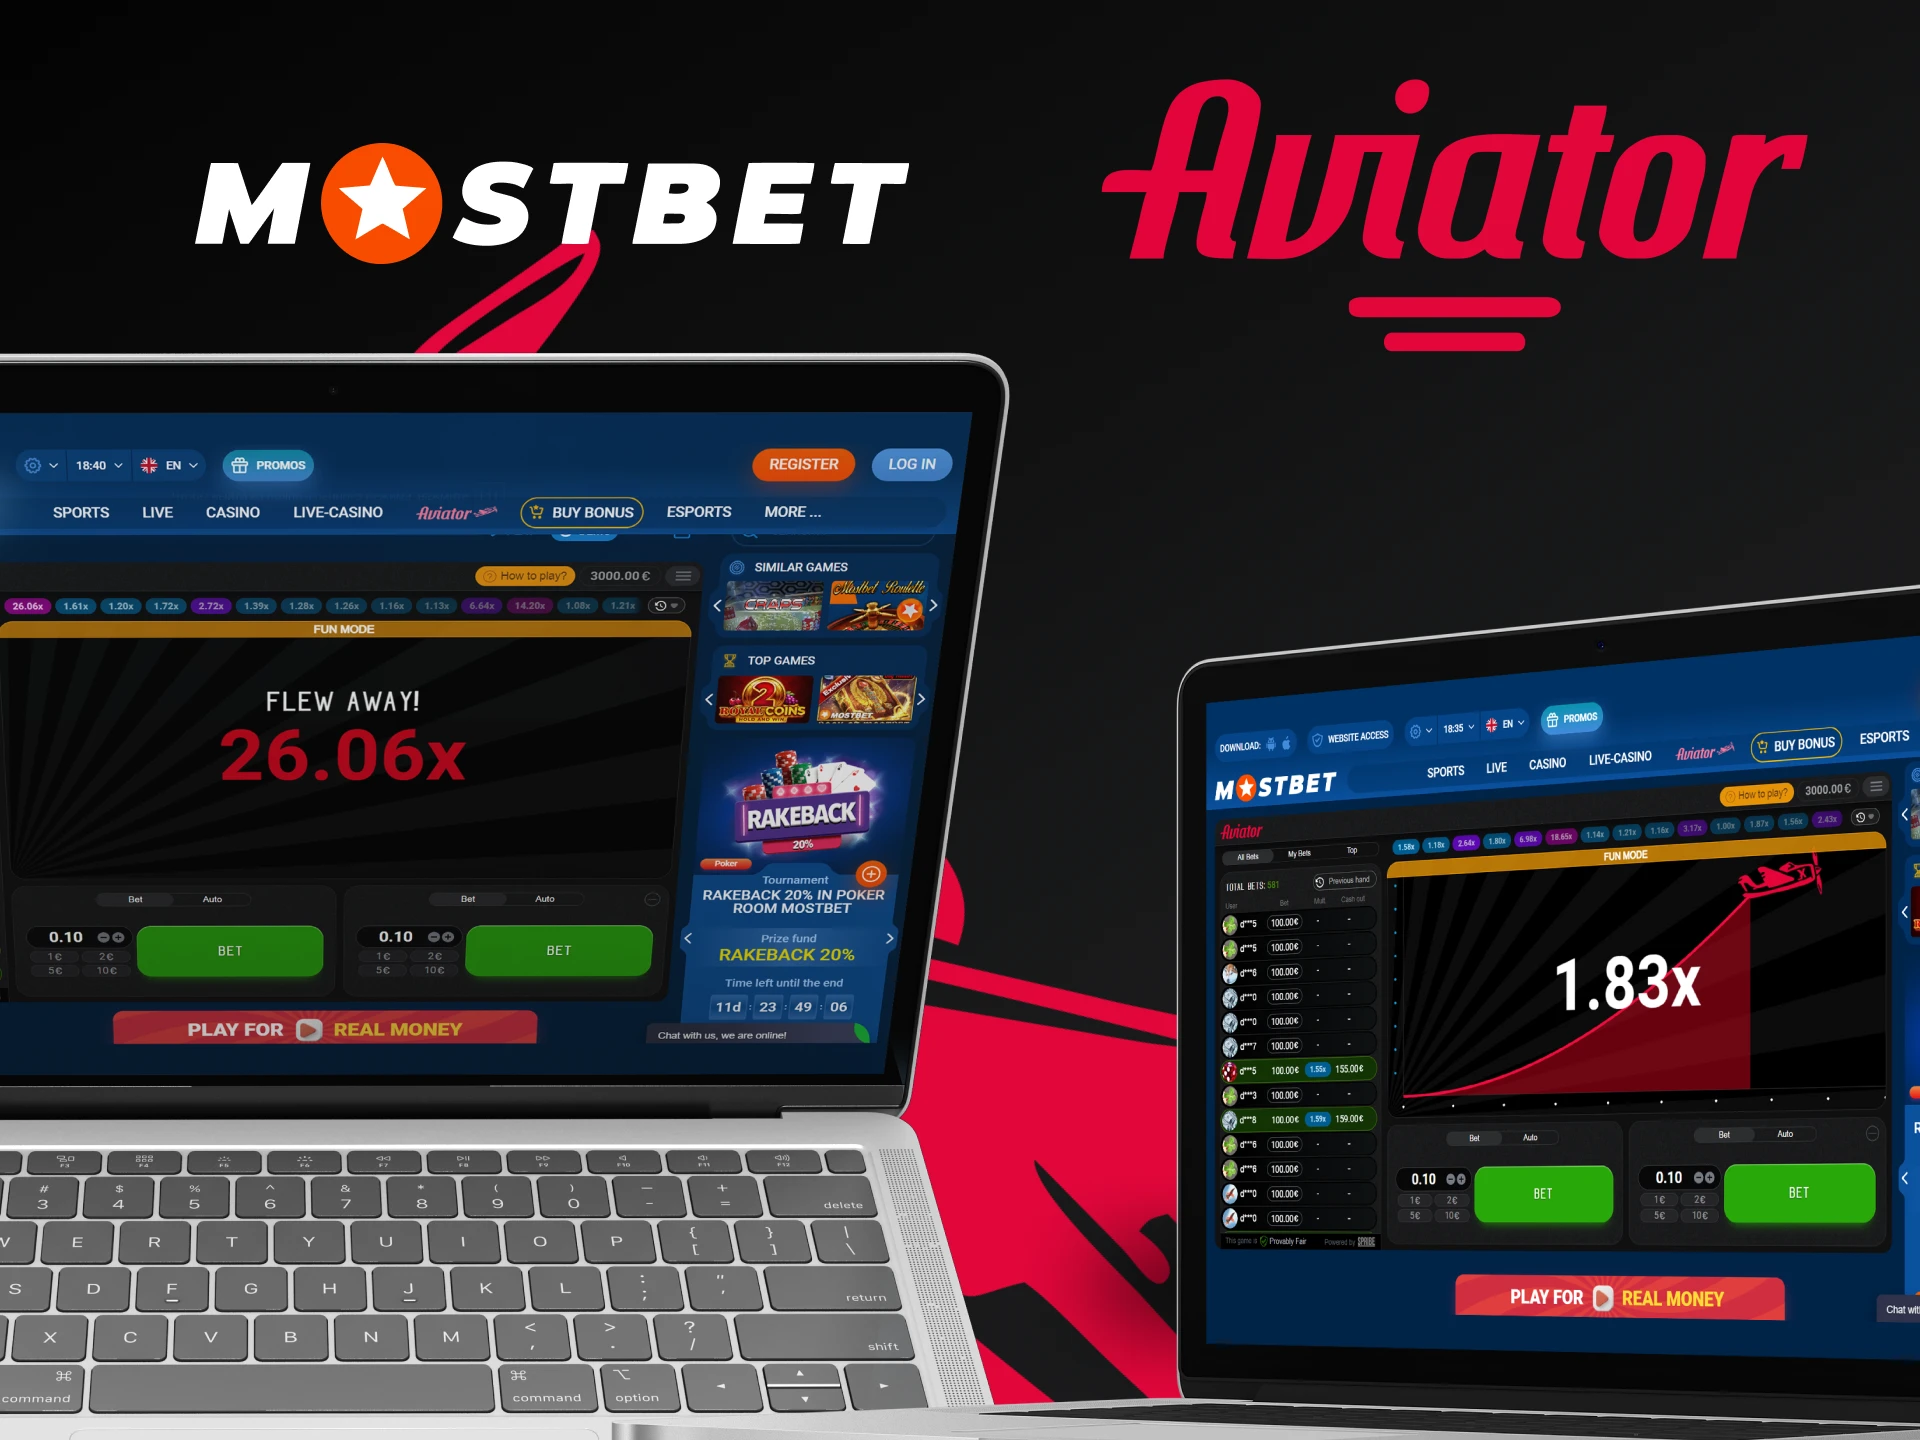 Play Aviator by Mostbet on any device.